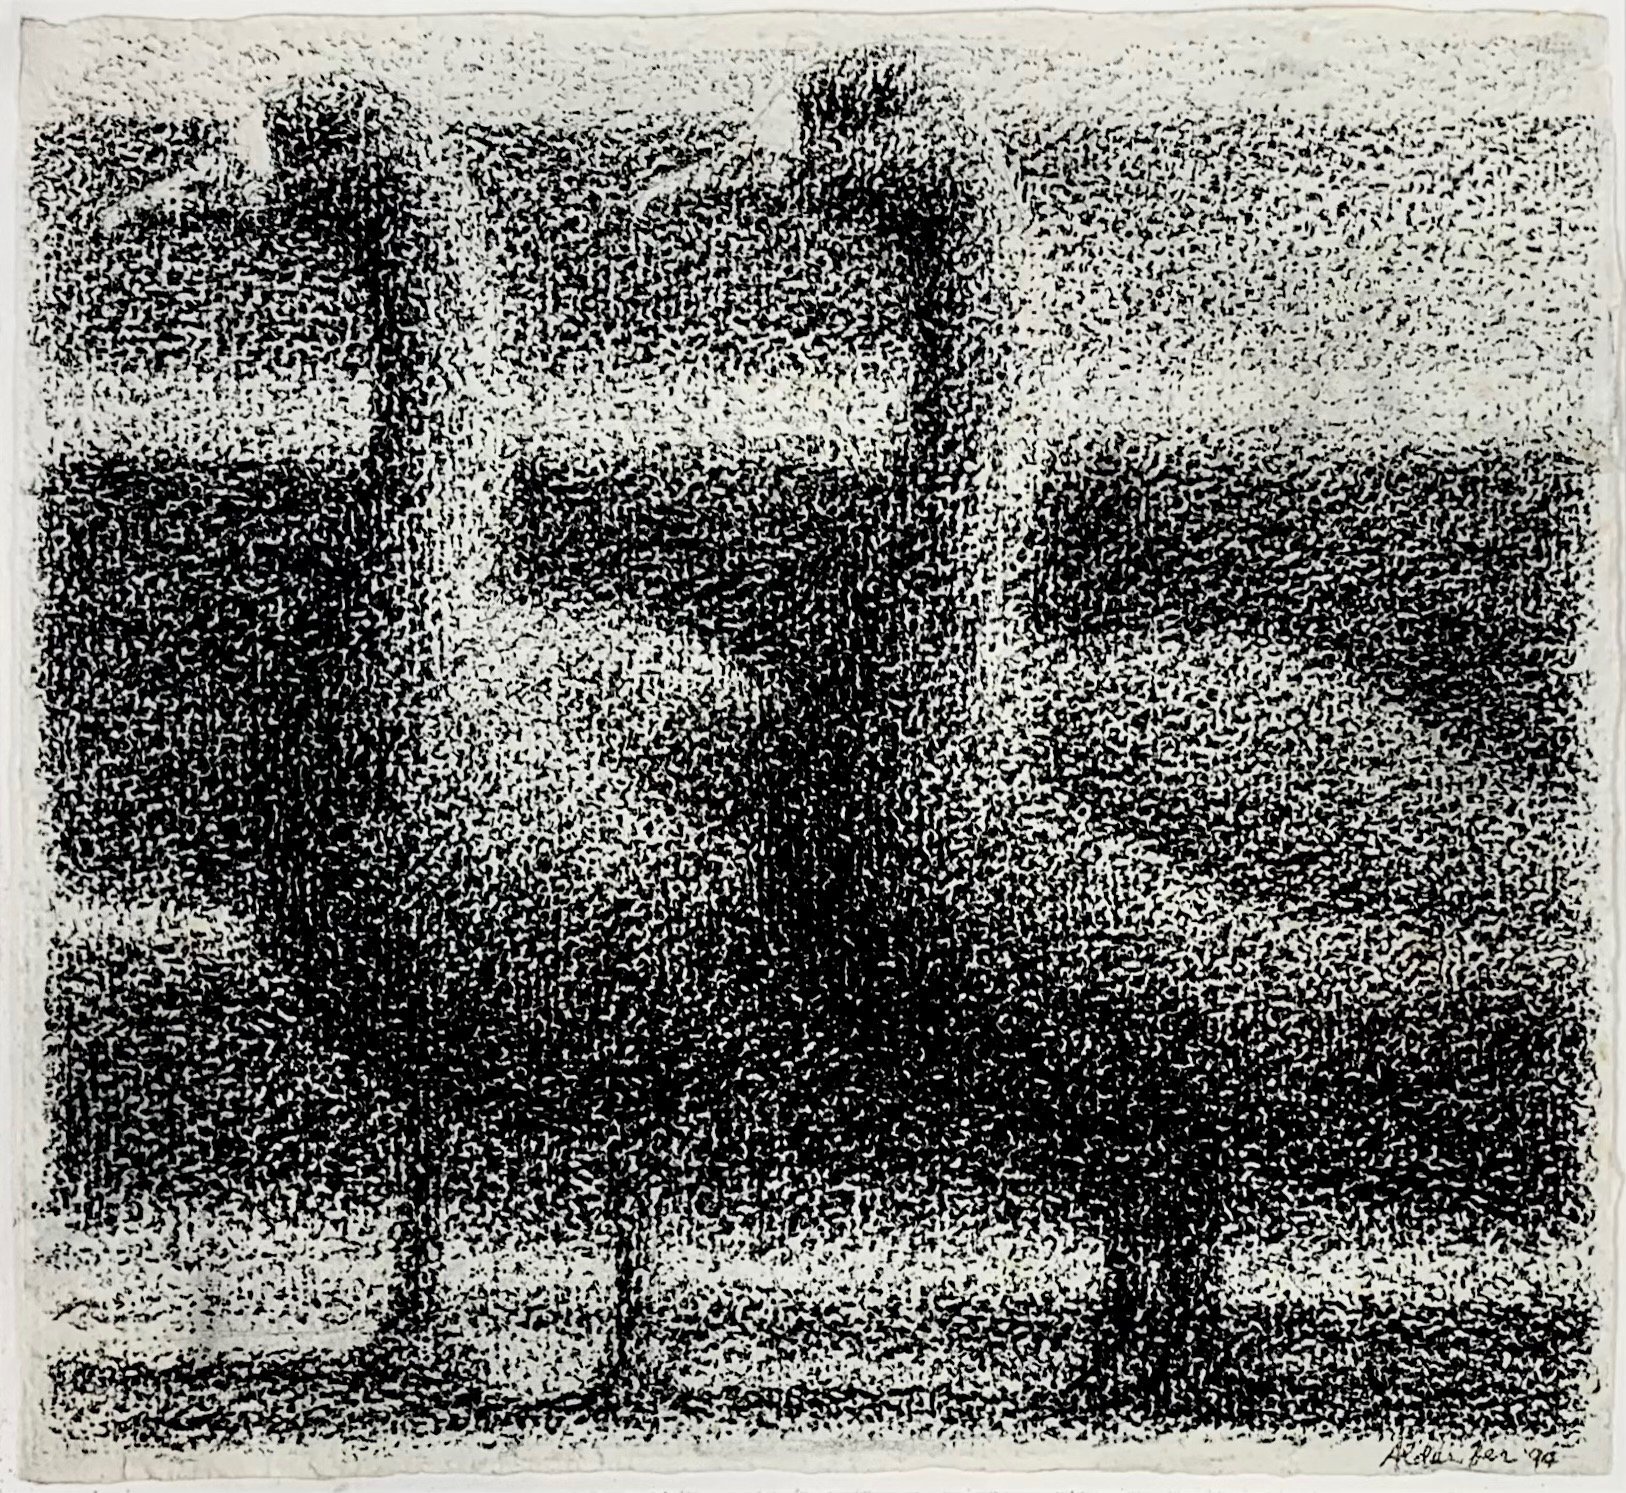 Standing Geese, 1994 (Copy)